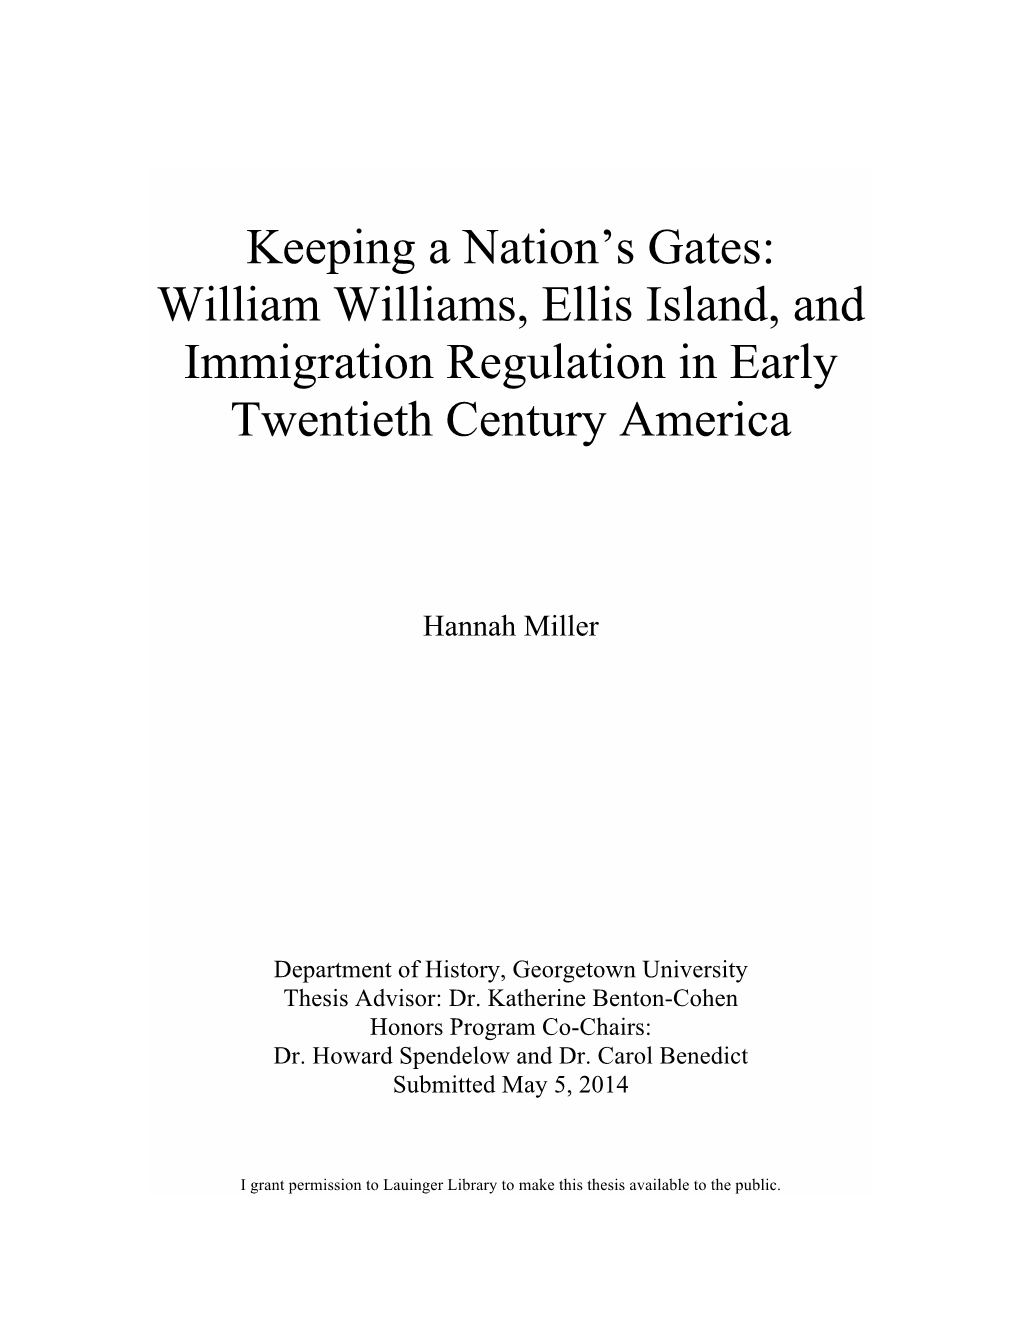 Keeping a Nation's Gates: William Williams, Ellis Island, And